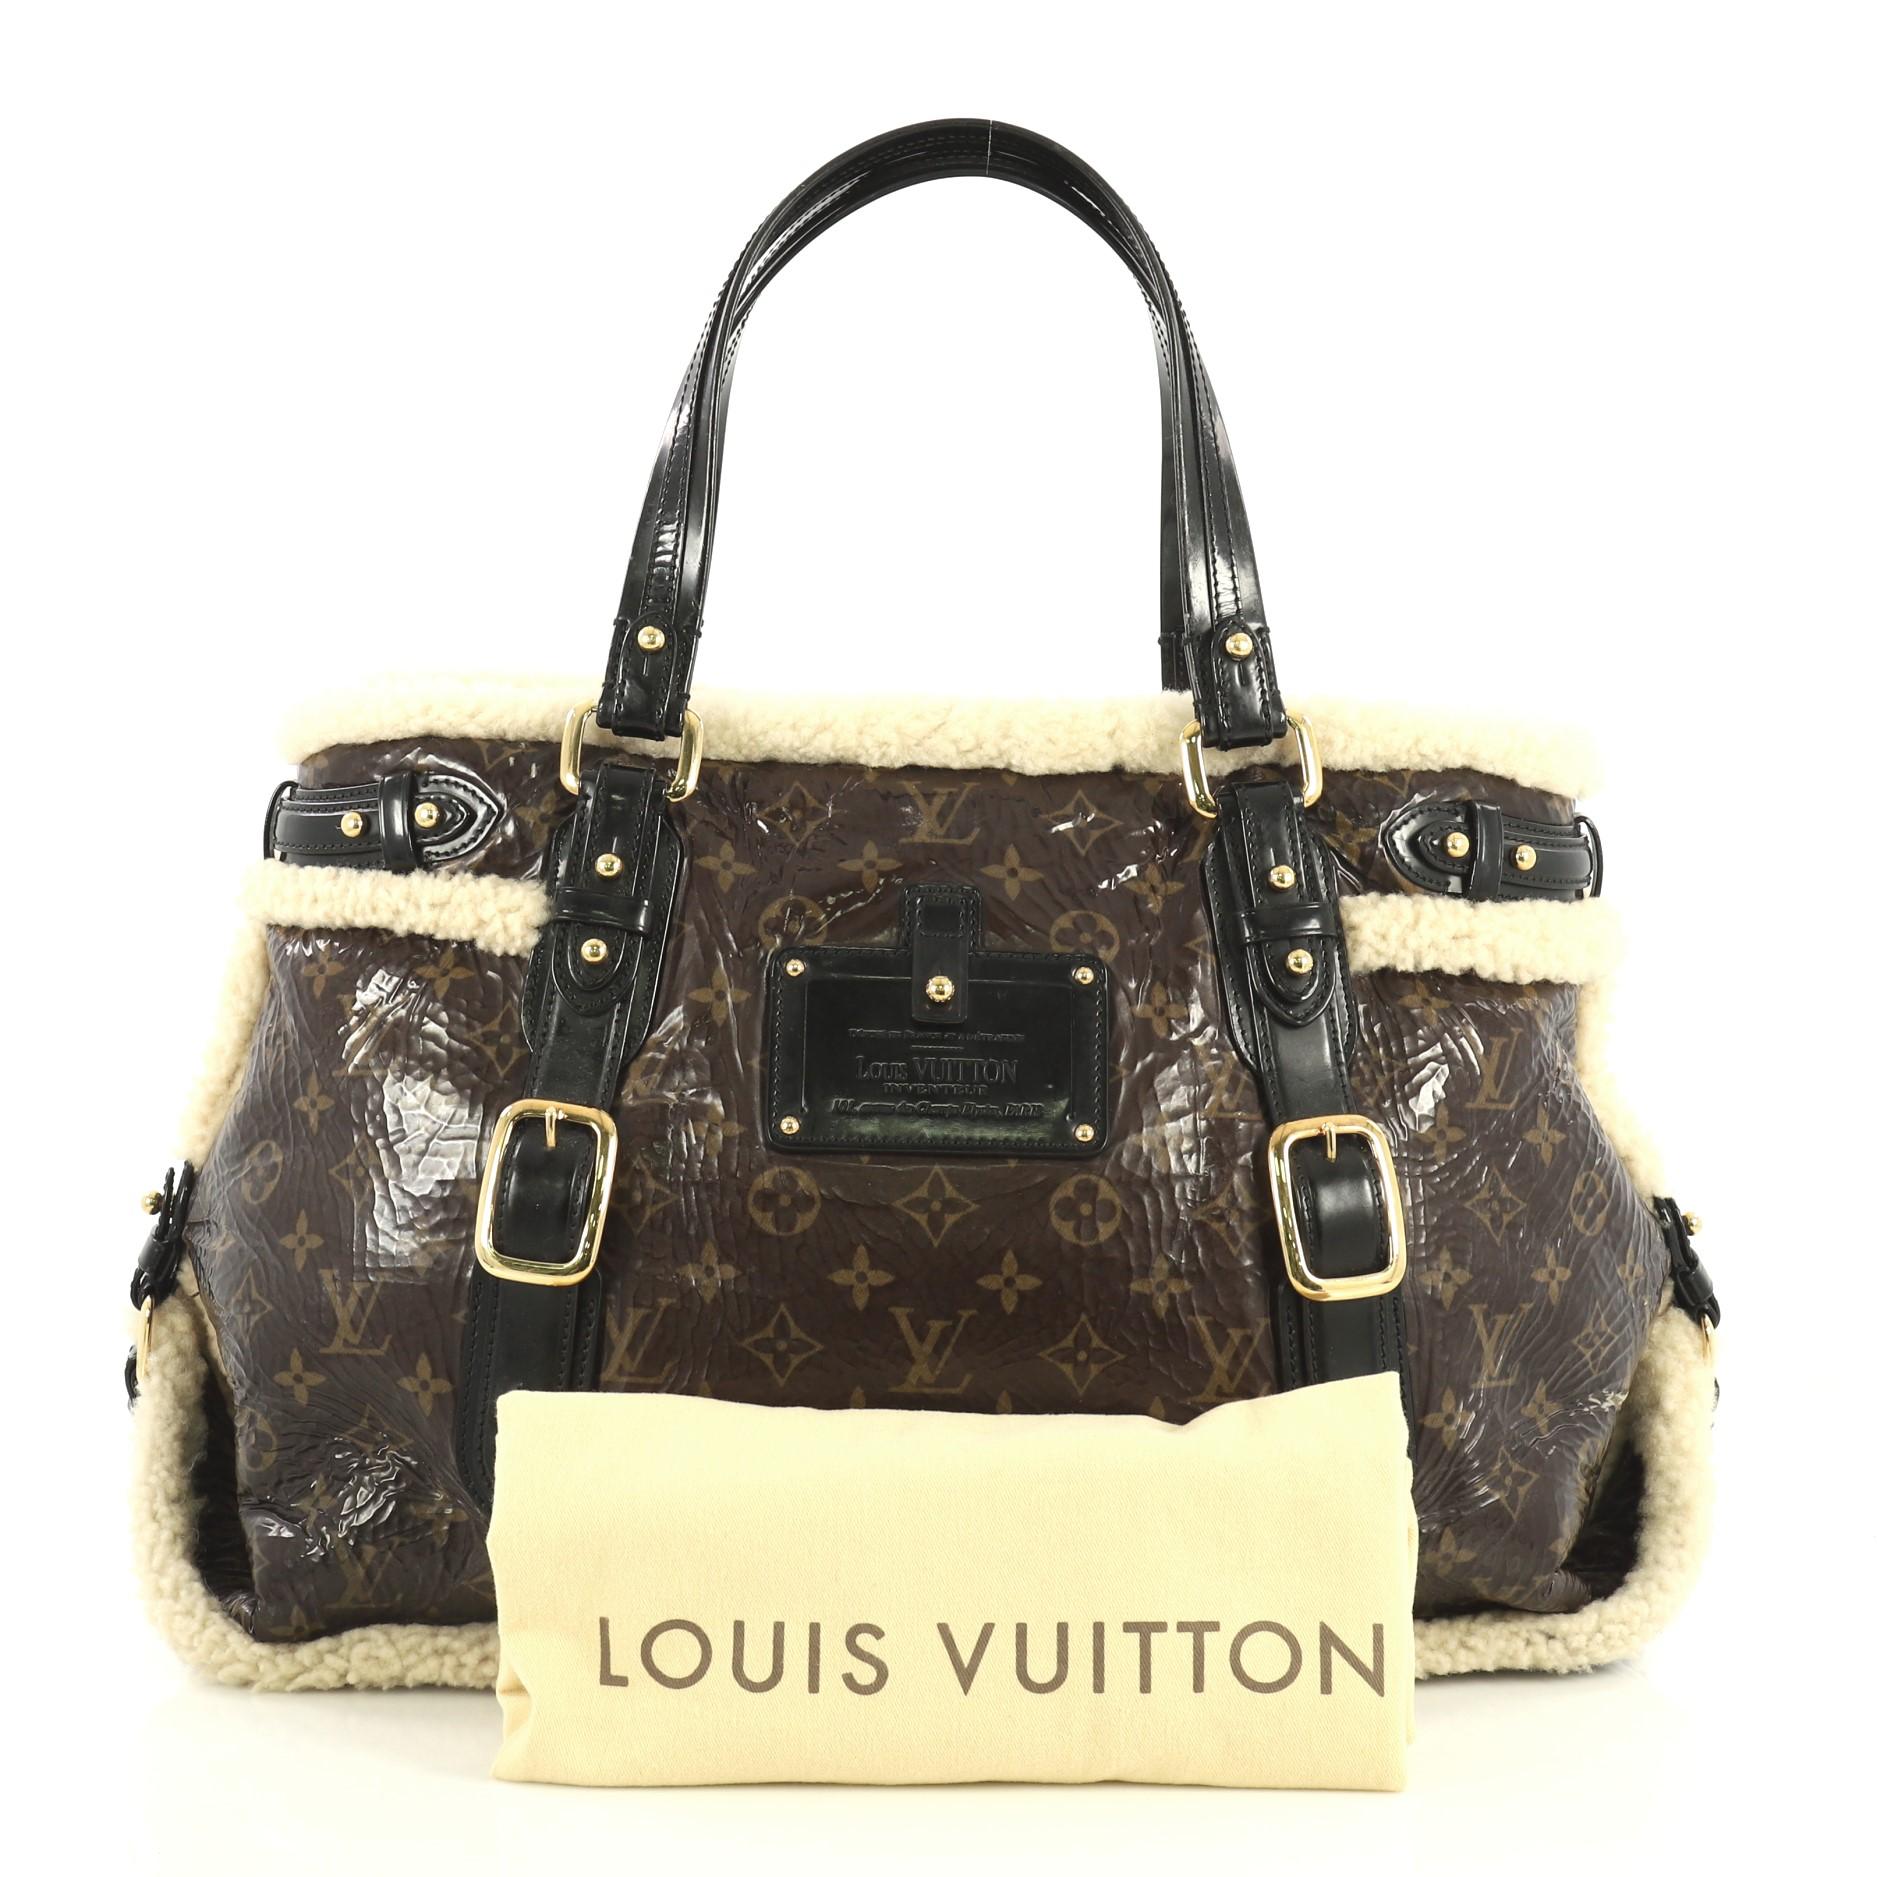 This Louis Vuitton Thunder Handbag Limited Edition Monogram and Shearling, crafted in brown monogram leather and shearling, features dual flat leather handles, Louis Vuitton Inventeur plaque, and gold-tone hardware. Its snap button closure opens to